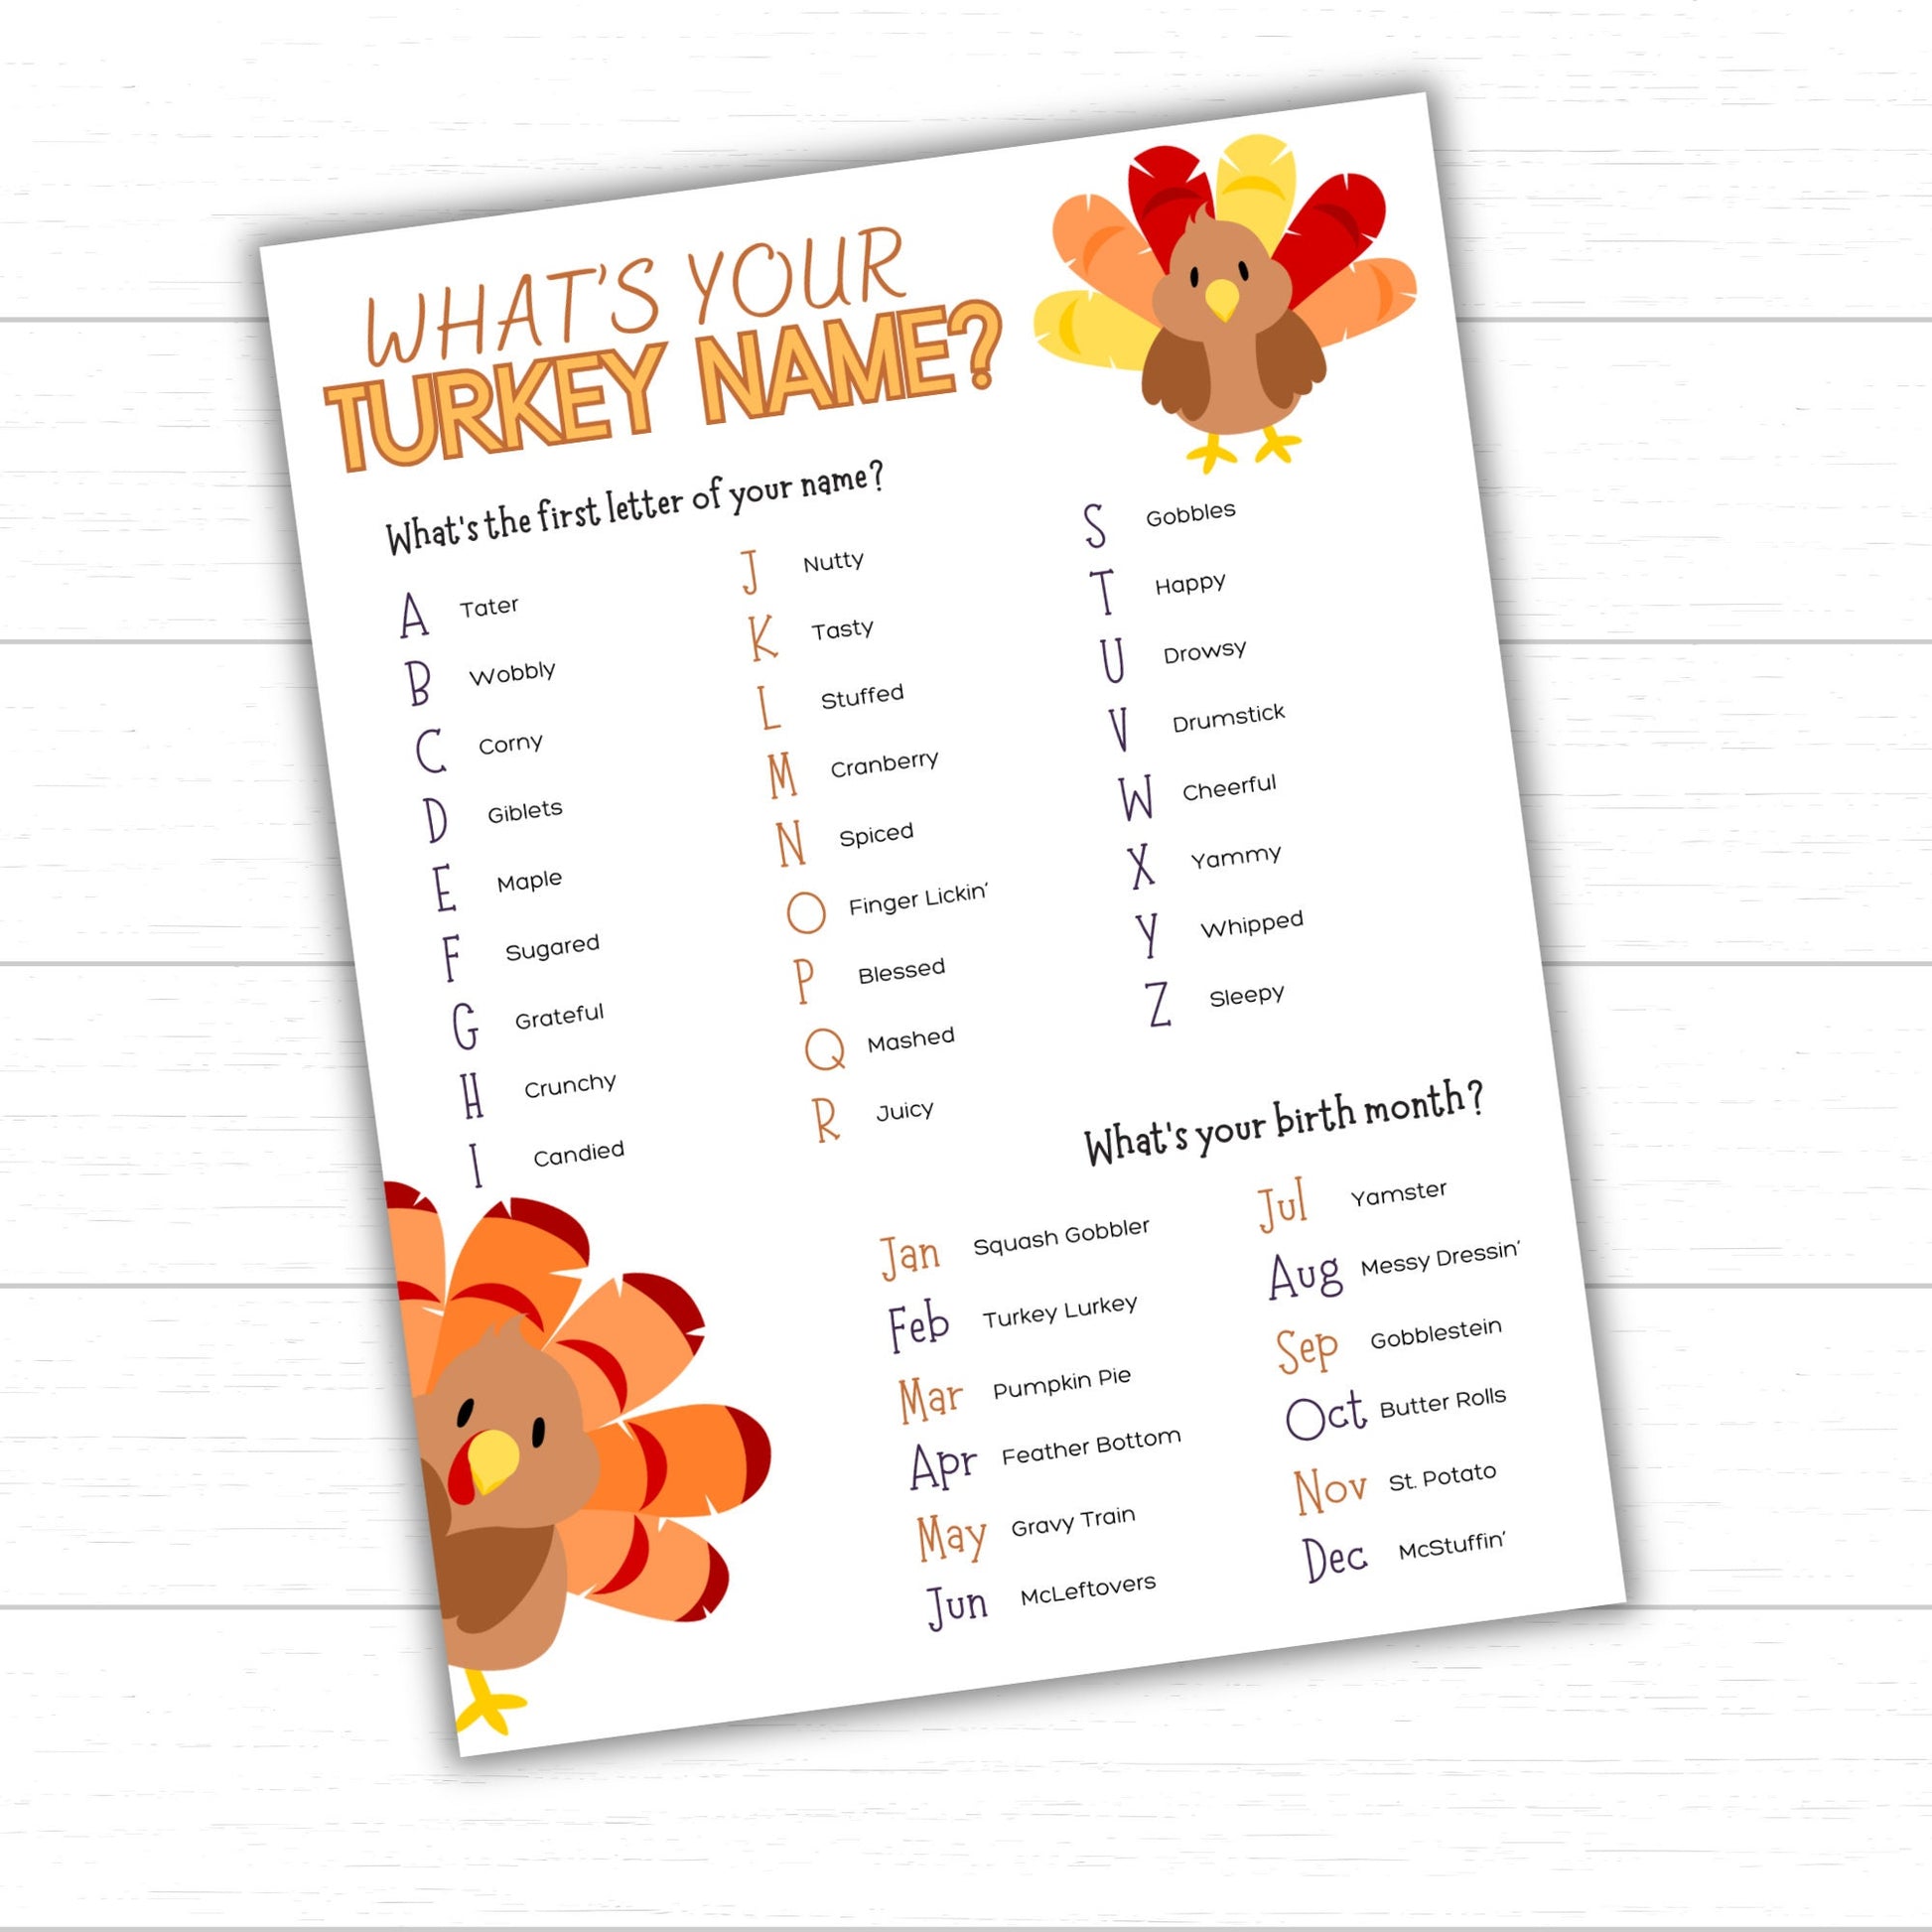 What's Your Turkey Name Game, Printable What's Your Turkey Name Game for Thanksgiving, Thanksgiving Printables, Printable Turkey Name Game